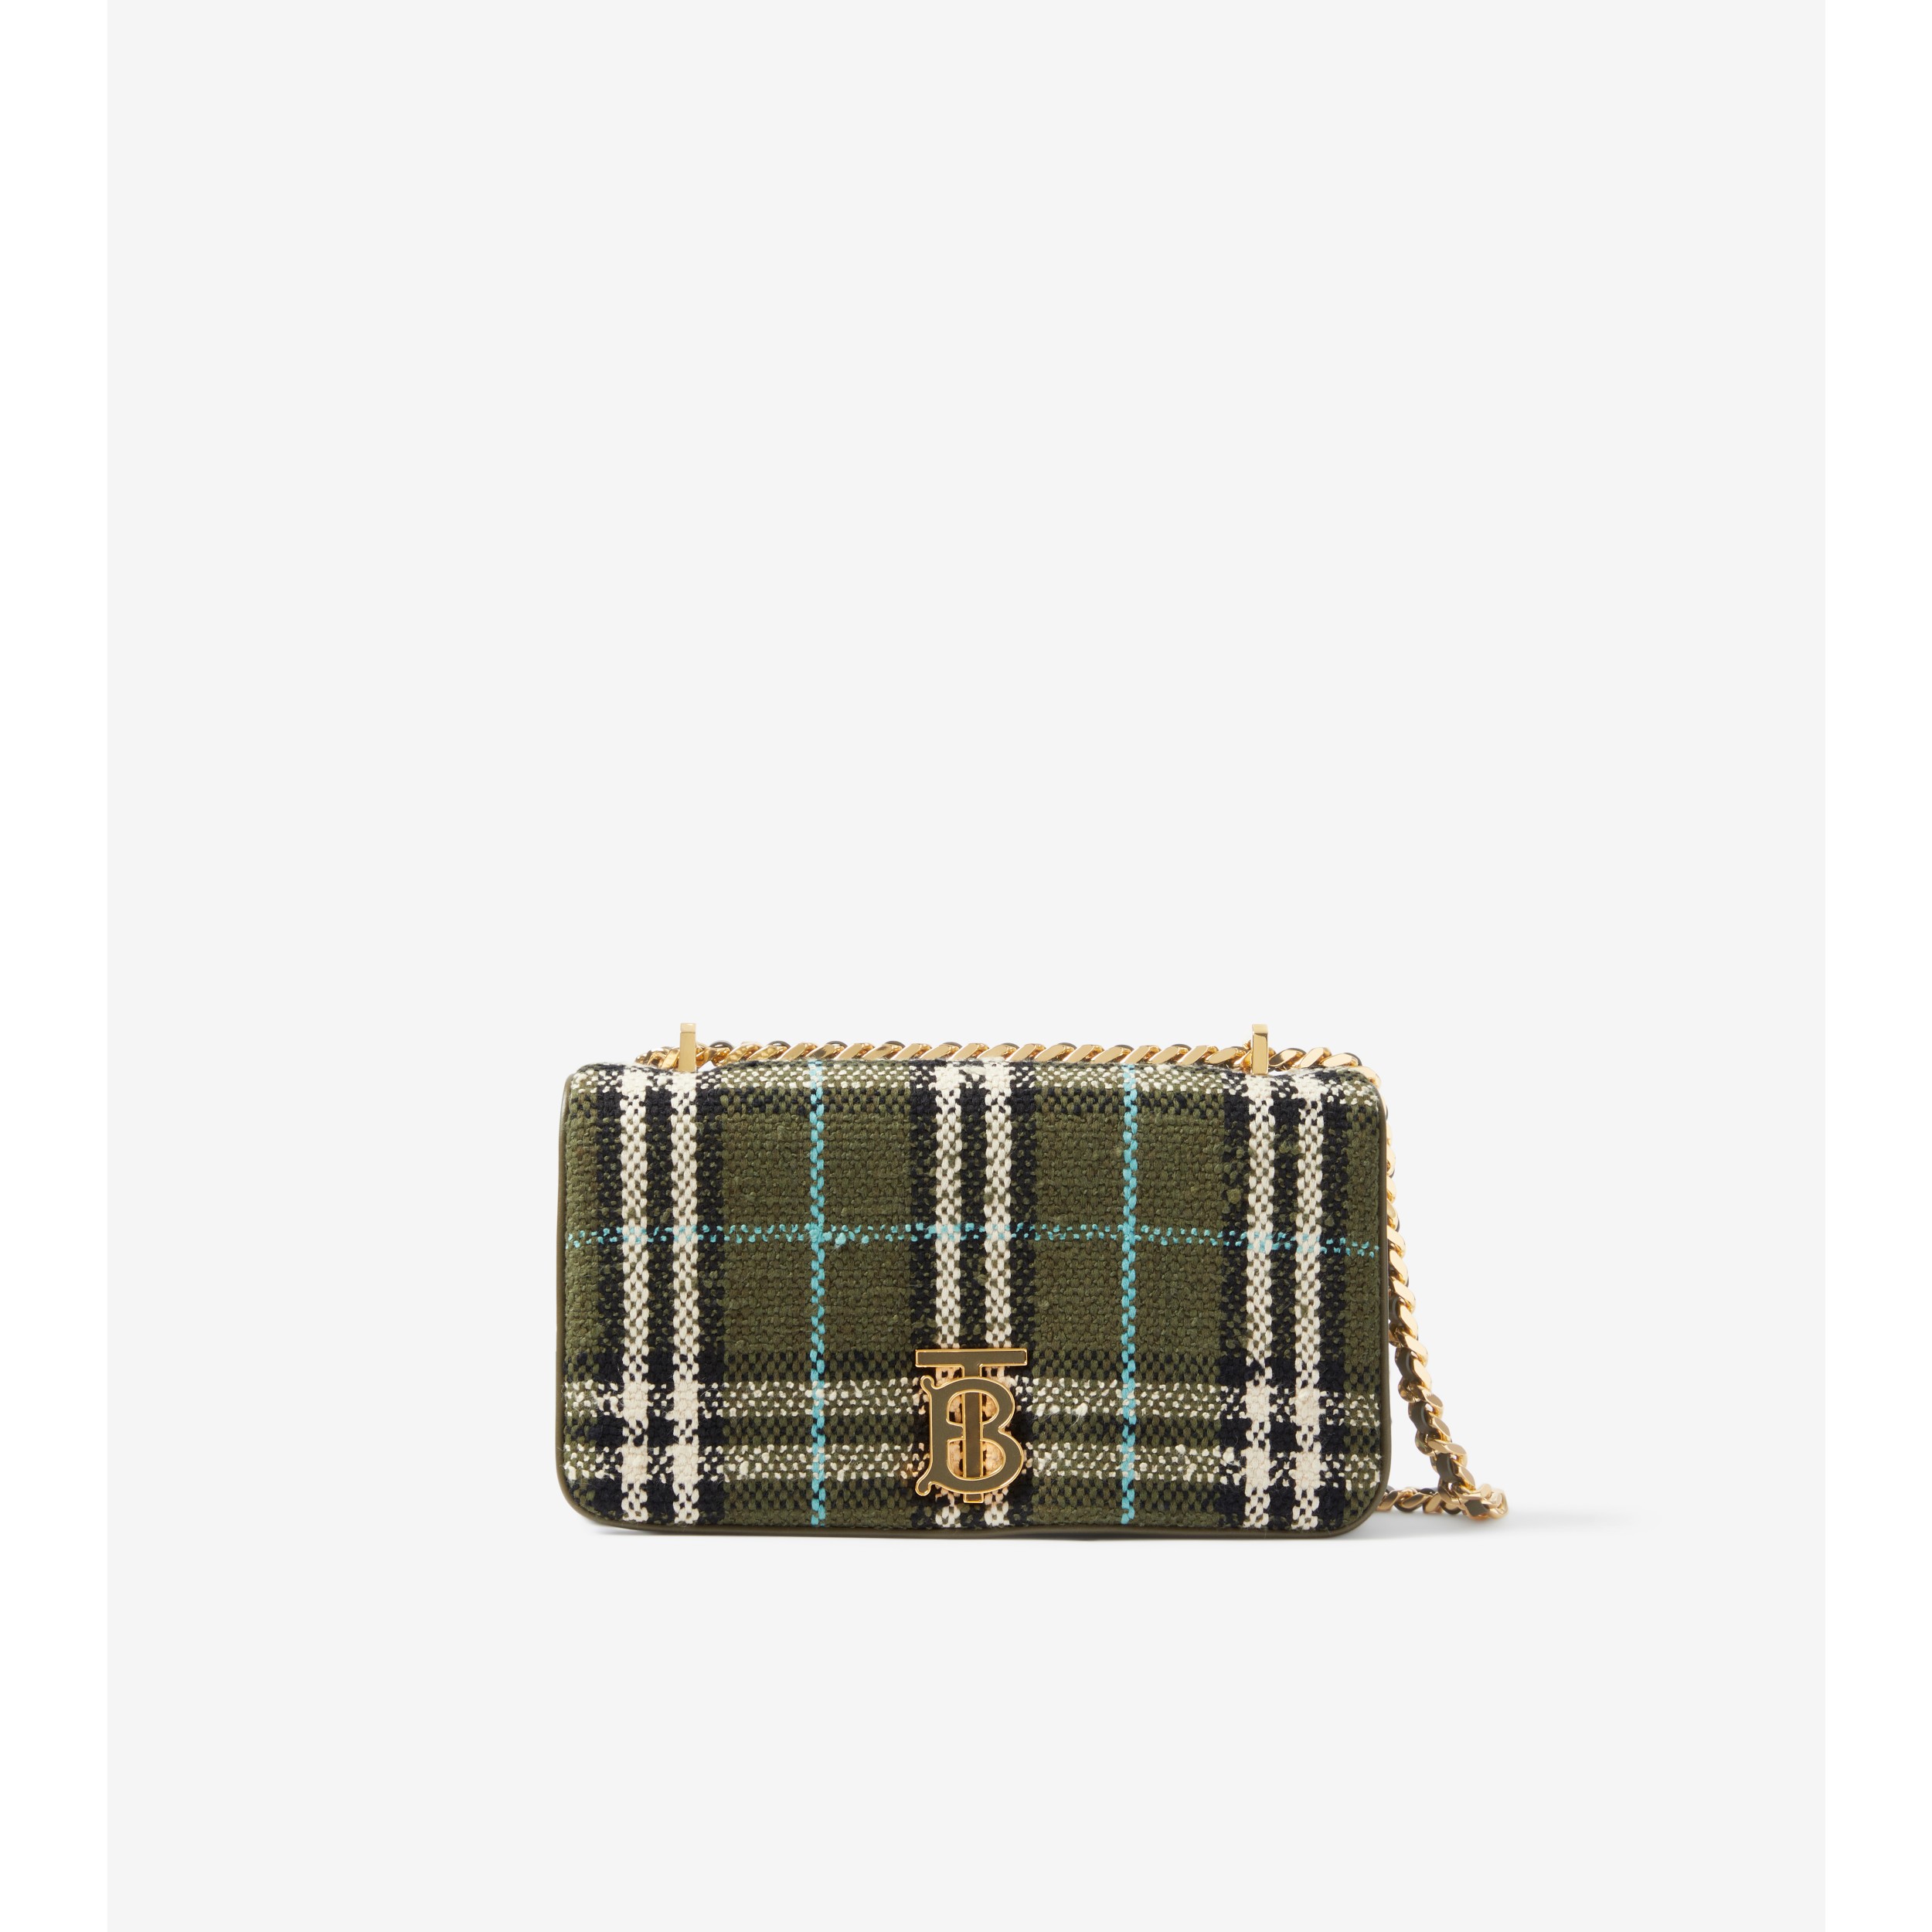 Is burberry lola sling bag worth buying? - Quora